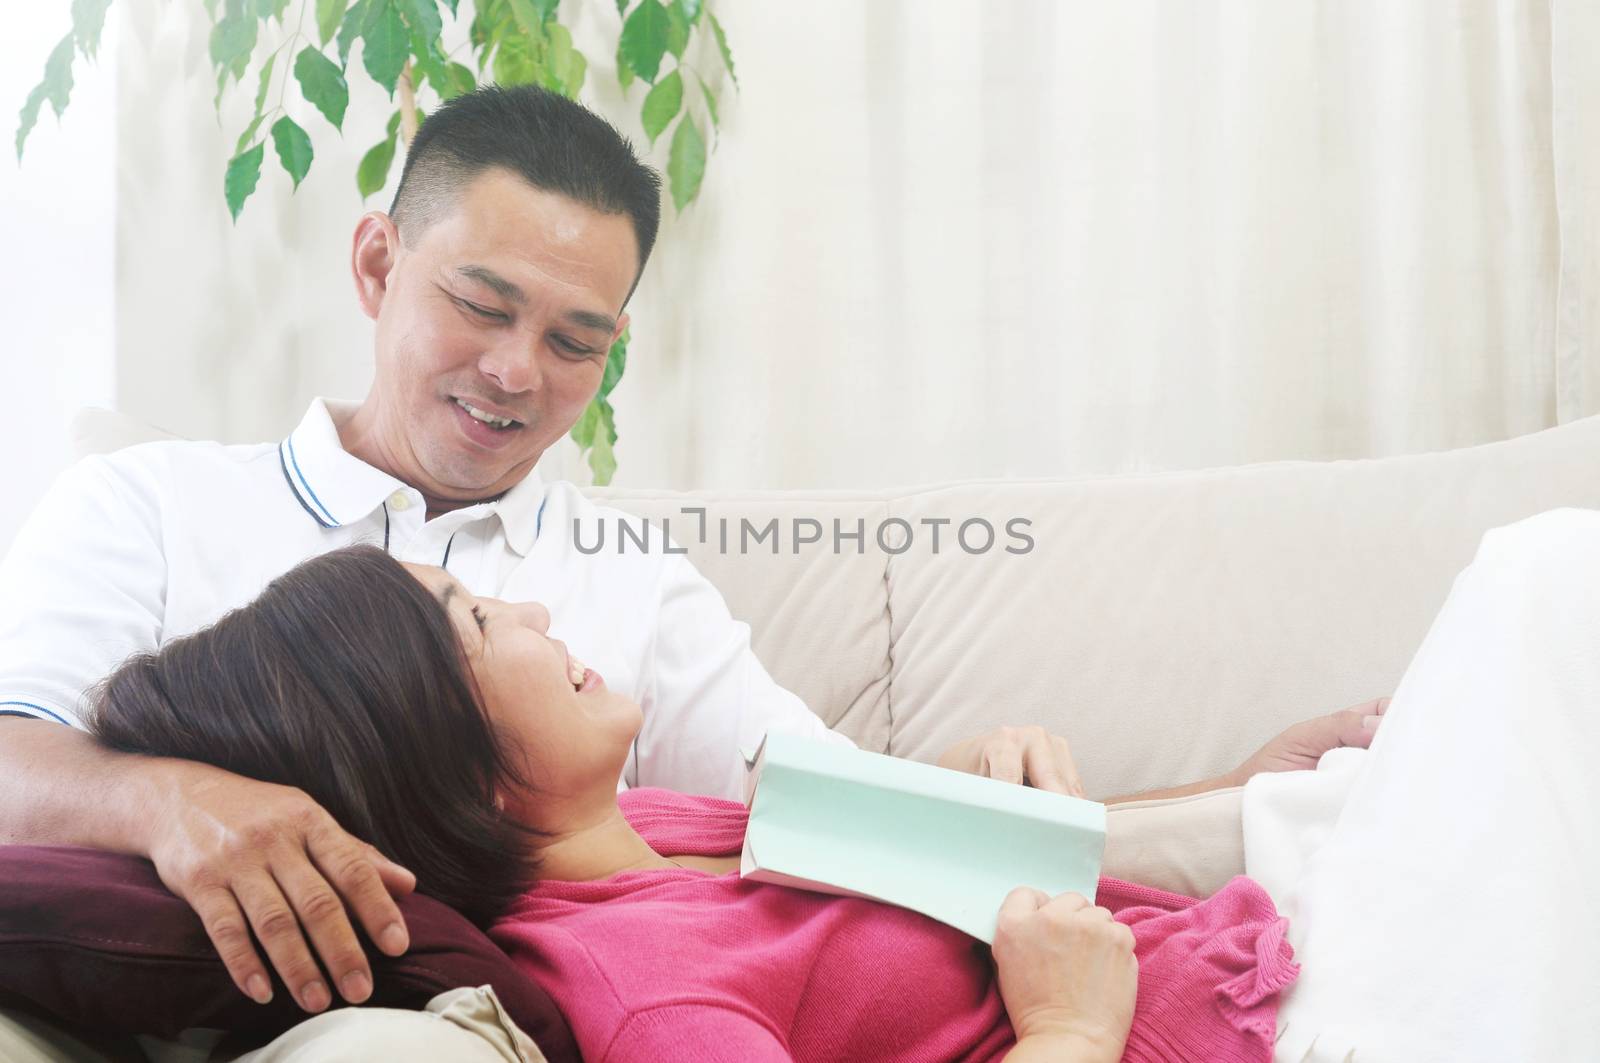 Asian Middle age couple looking at each other with love